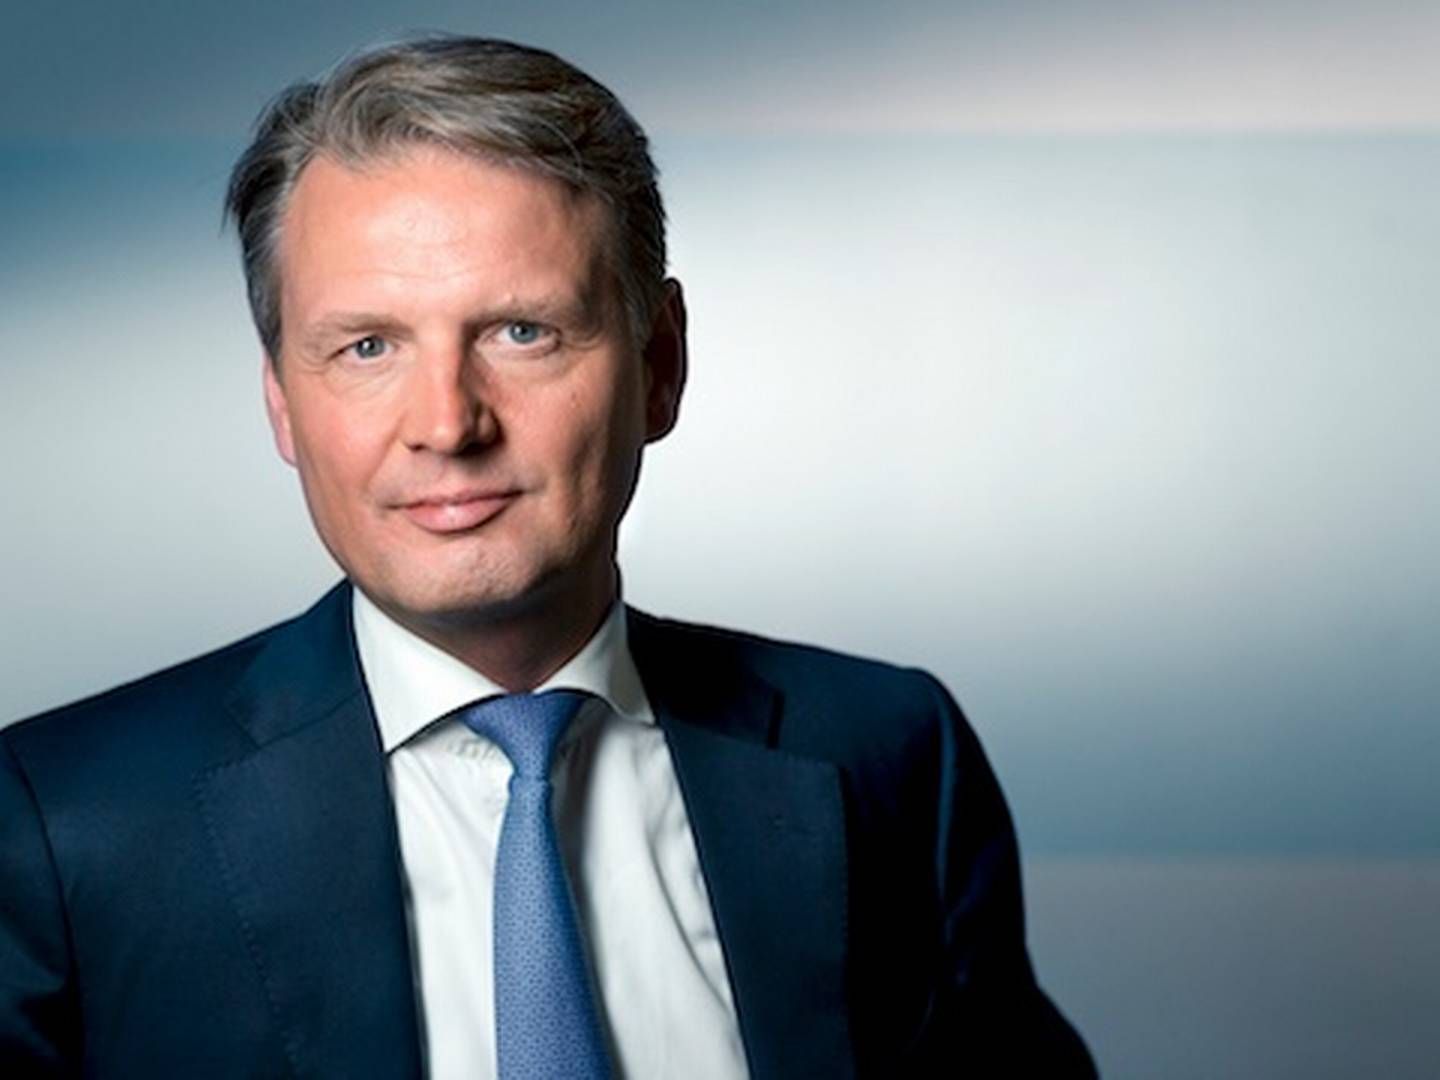 Henrik Ramskov is one of four partners in the ownership circle behind Navigare Capital Partners, which has several Danish pensions funds as investors. | Photo: Pr / Navigare Capital Partners